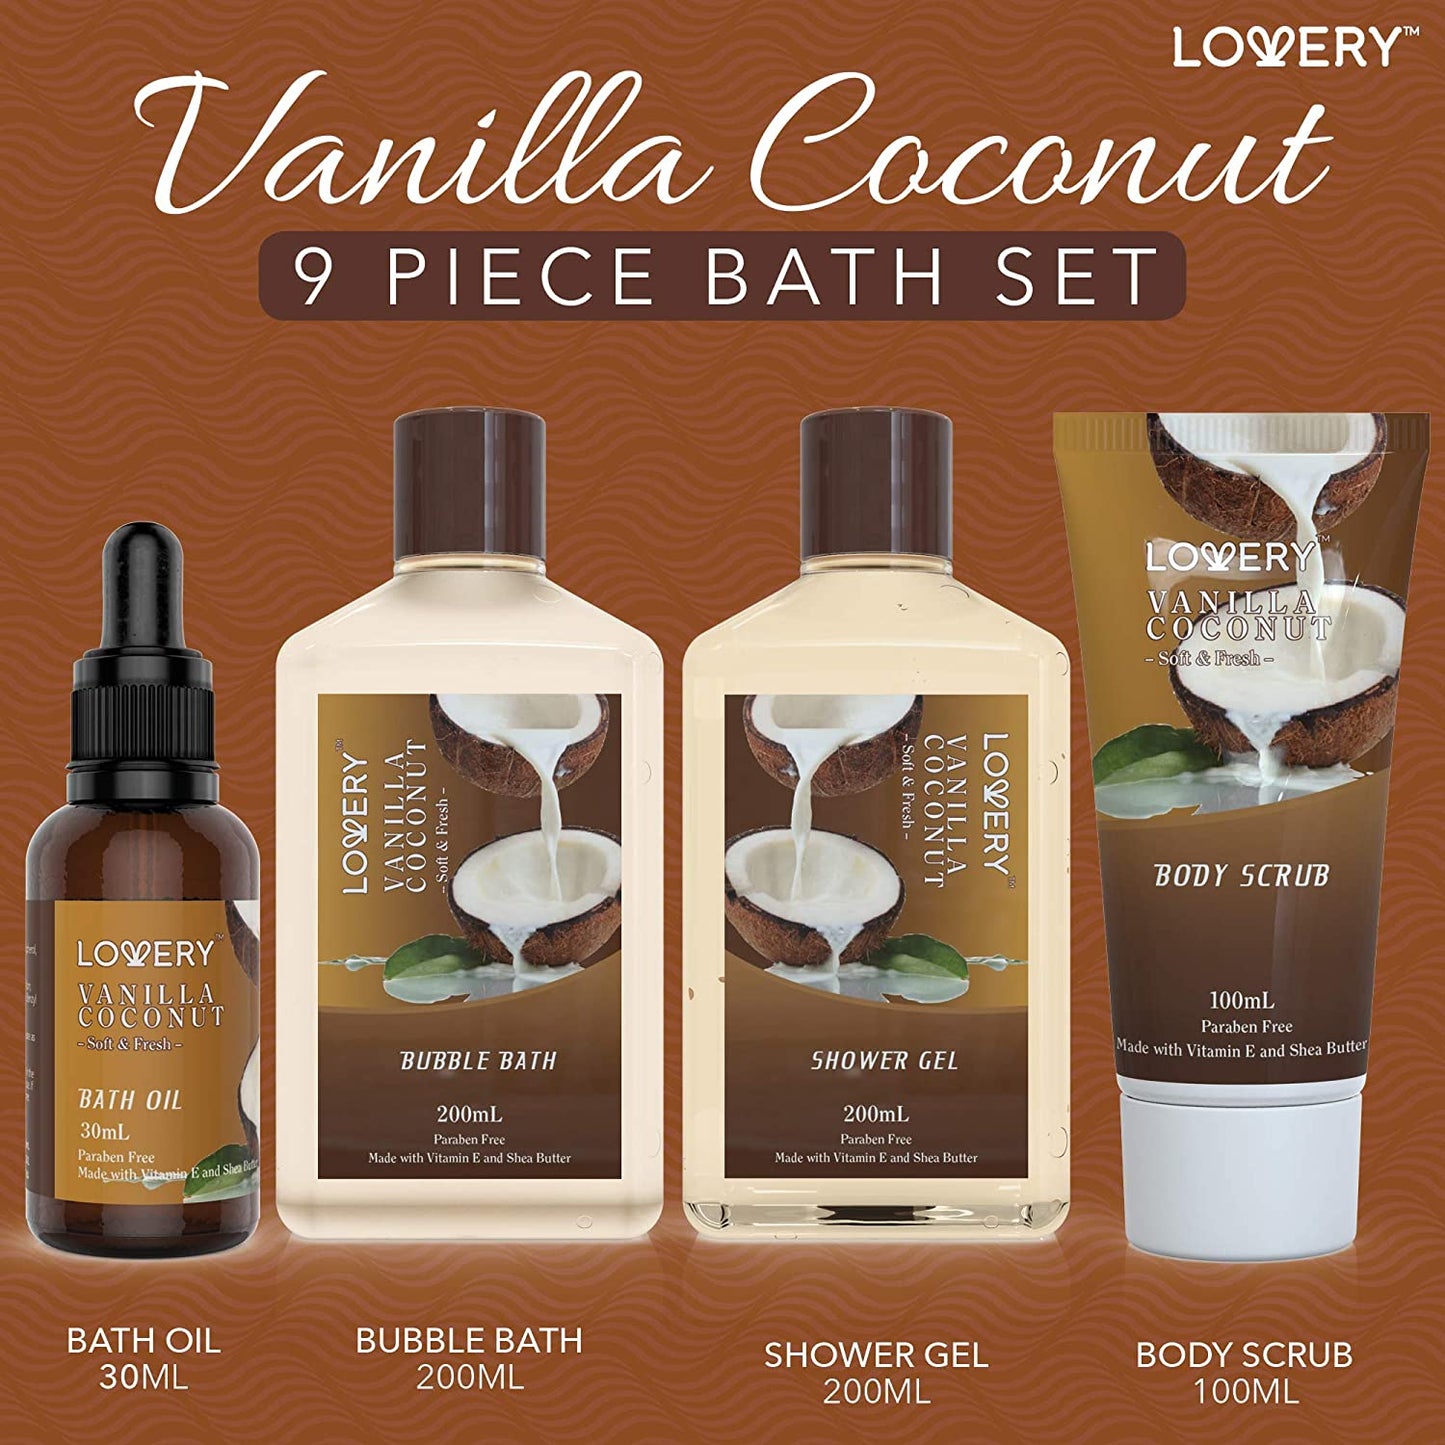 Coconut Bath Bomb, Vanilla Bath Set, Lovery, Gift Basket, Lovery Gift, Lovery Gift Set, Lovery Bath Gift Set, Vanilla Coconut Luxury Bath Gift Set, Elegant Spa Package, Vanilla & Coconut Bliss, Luxury Bath Bombs, Pampering Spa Delight, Shea Butter Enriched Set, Relaxation & Rejuvenation, Luscious Vanilla Aroma, Cruelty-Free Spa Set, Skin Care with Lovery